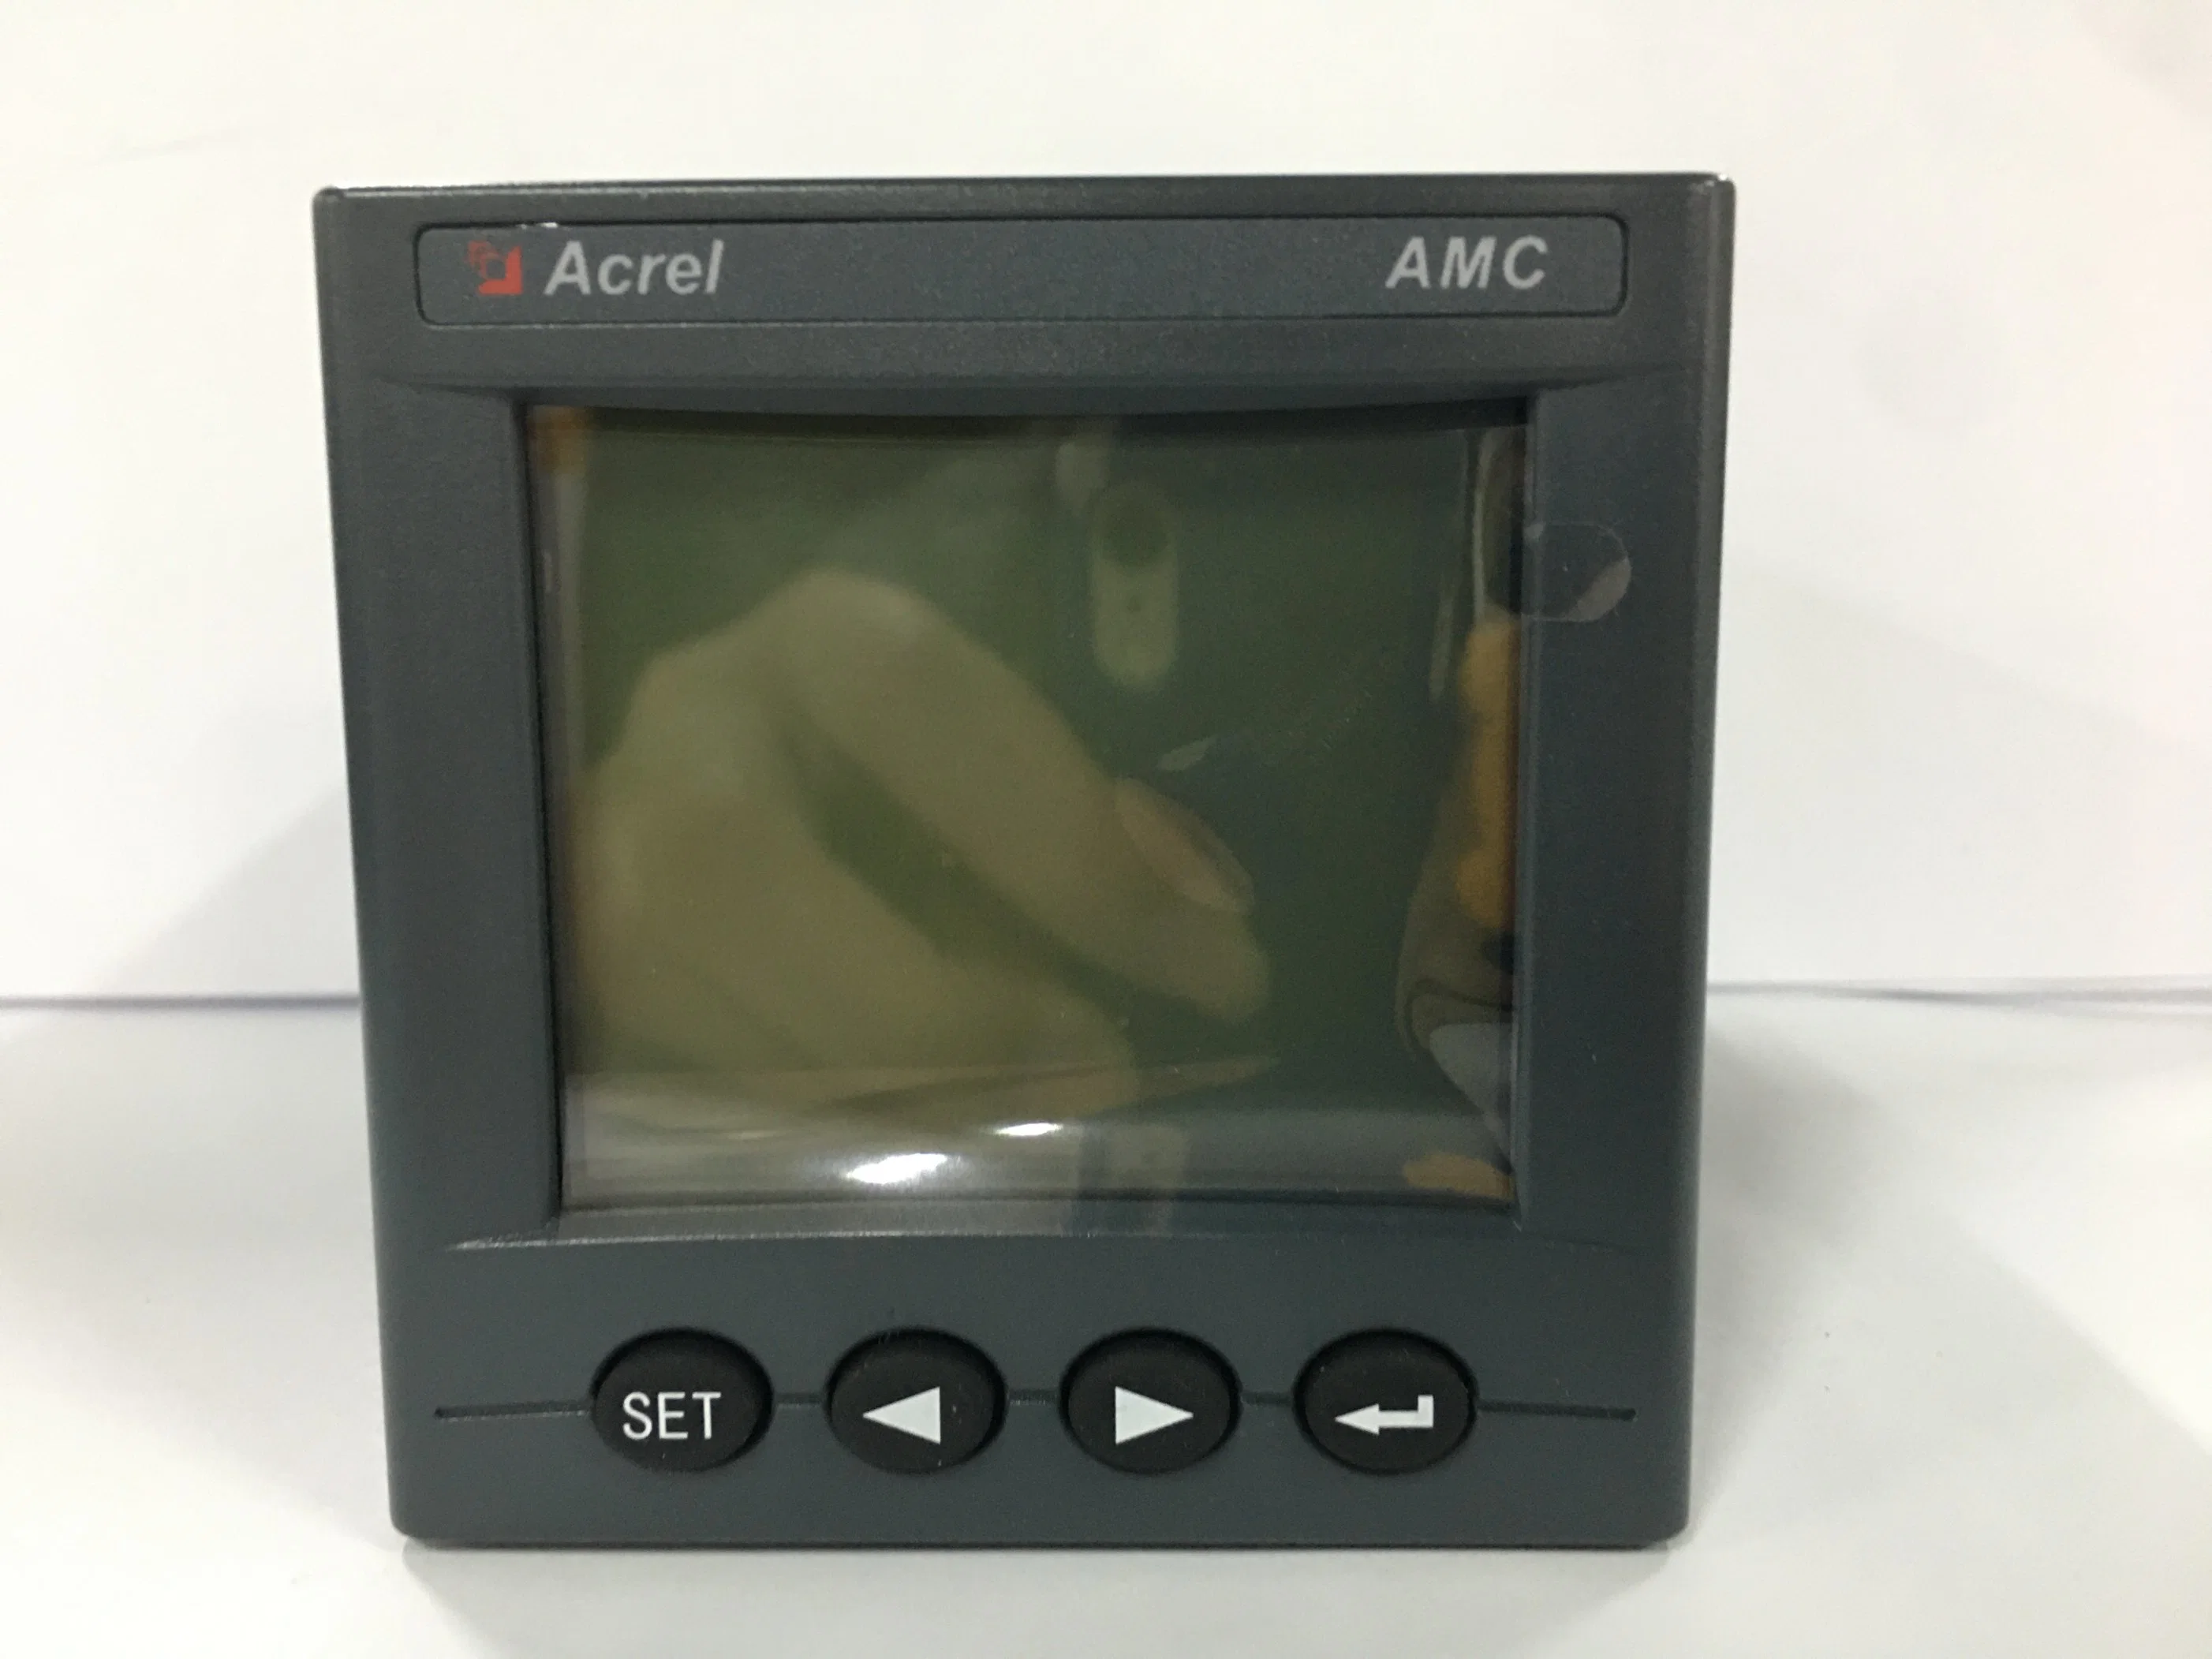 Amc72L-E4kc Smart Intelligent Power Collection and Monitoring Device with LCD Display